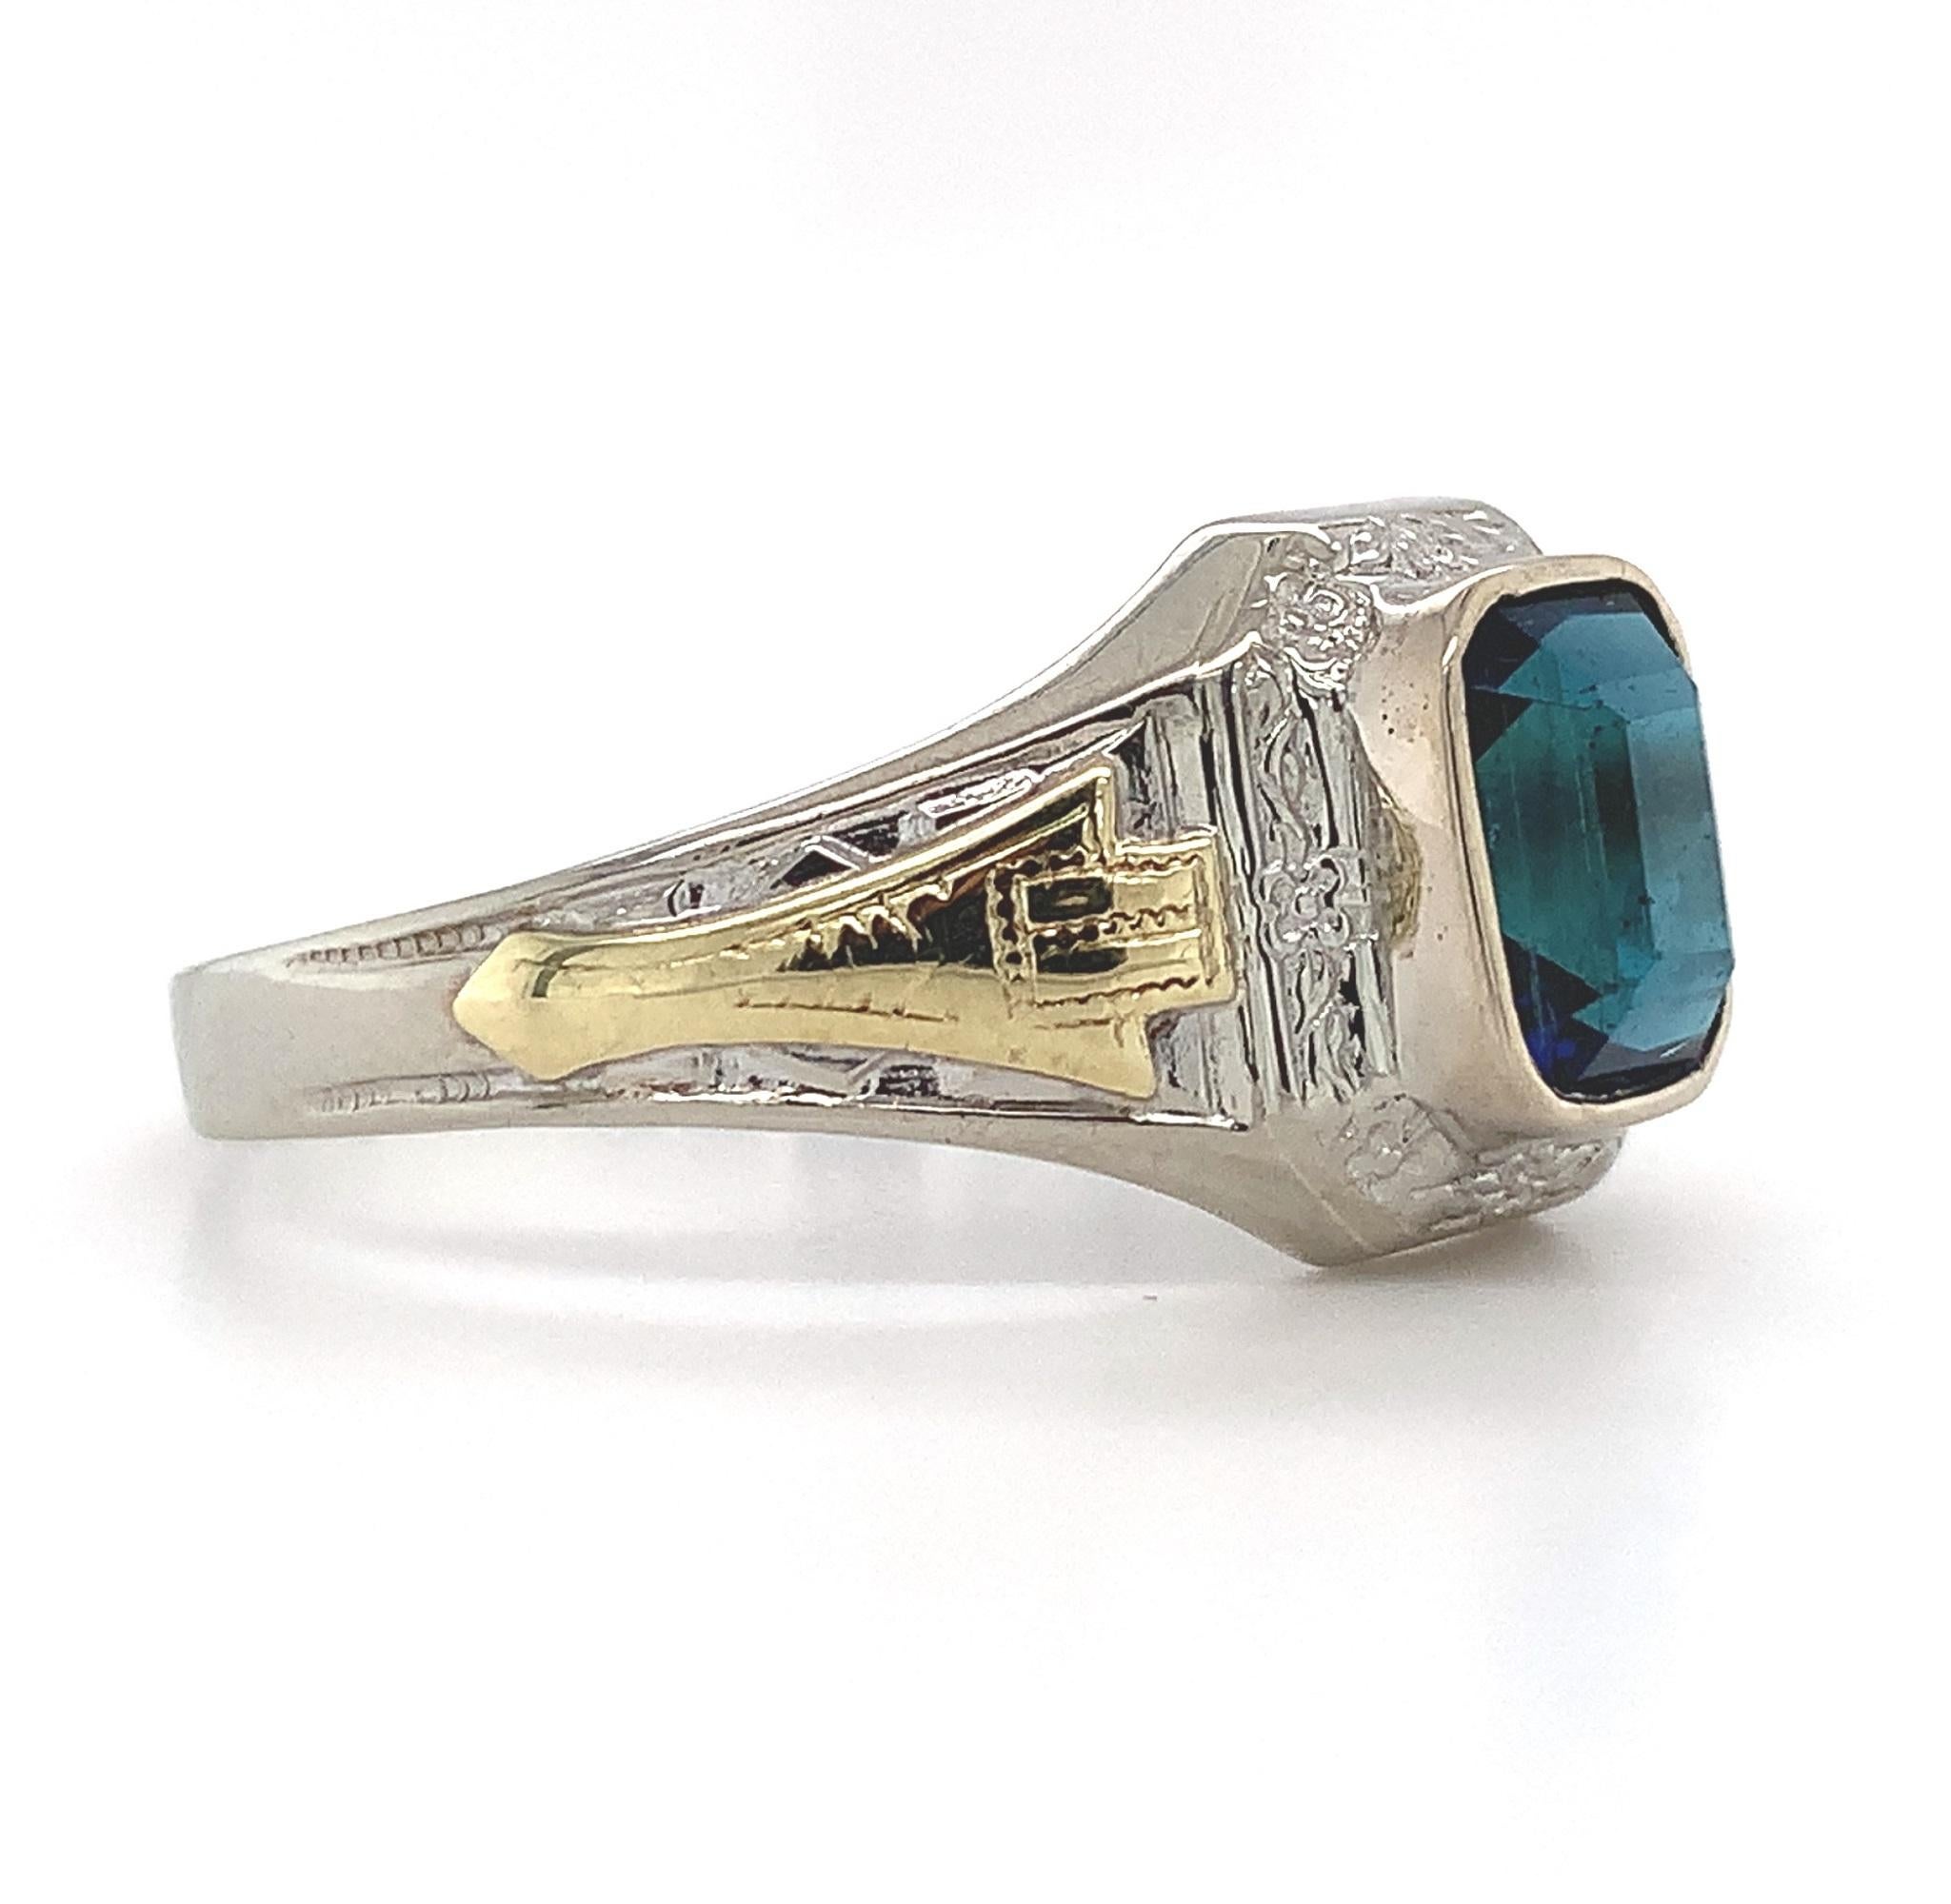 10K white gold Art Deco ring with applied yellow gold accents. The ring features an emerald cut blue-green tea color tourmaline weighing 1.54 carats. The tourmaline measures about 704mm x 5.7mm and has a small chip. There is a new bezel. The ring